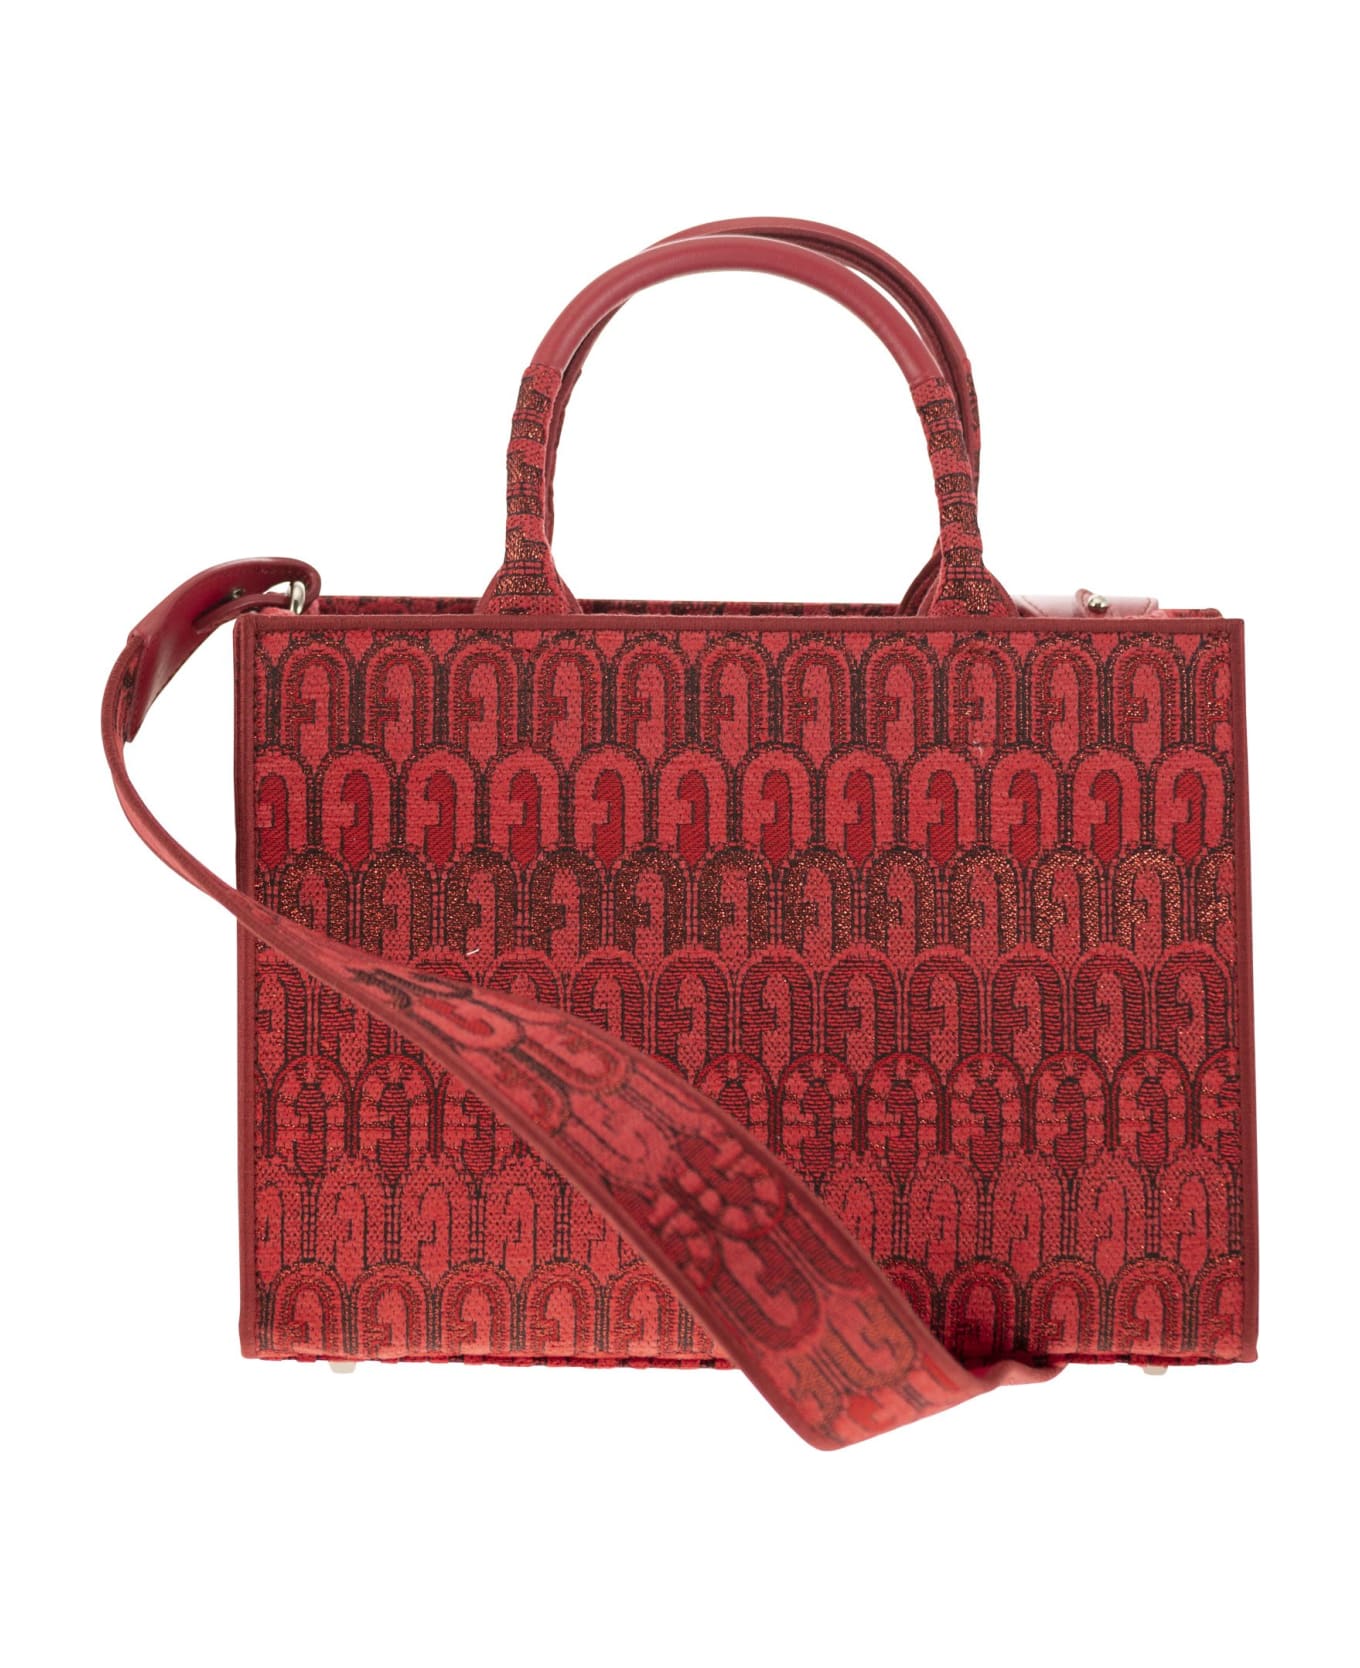 Furla Opportunity - Tote Bag Small - Red